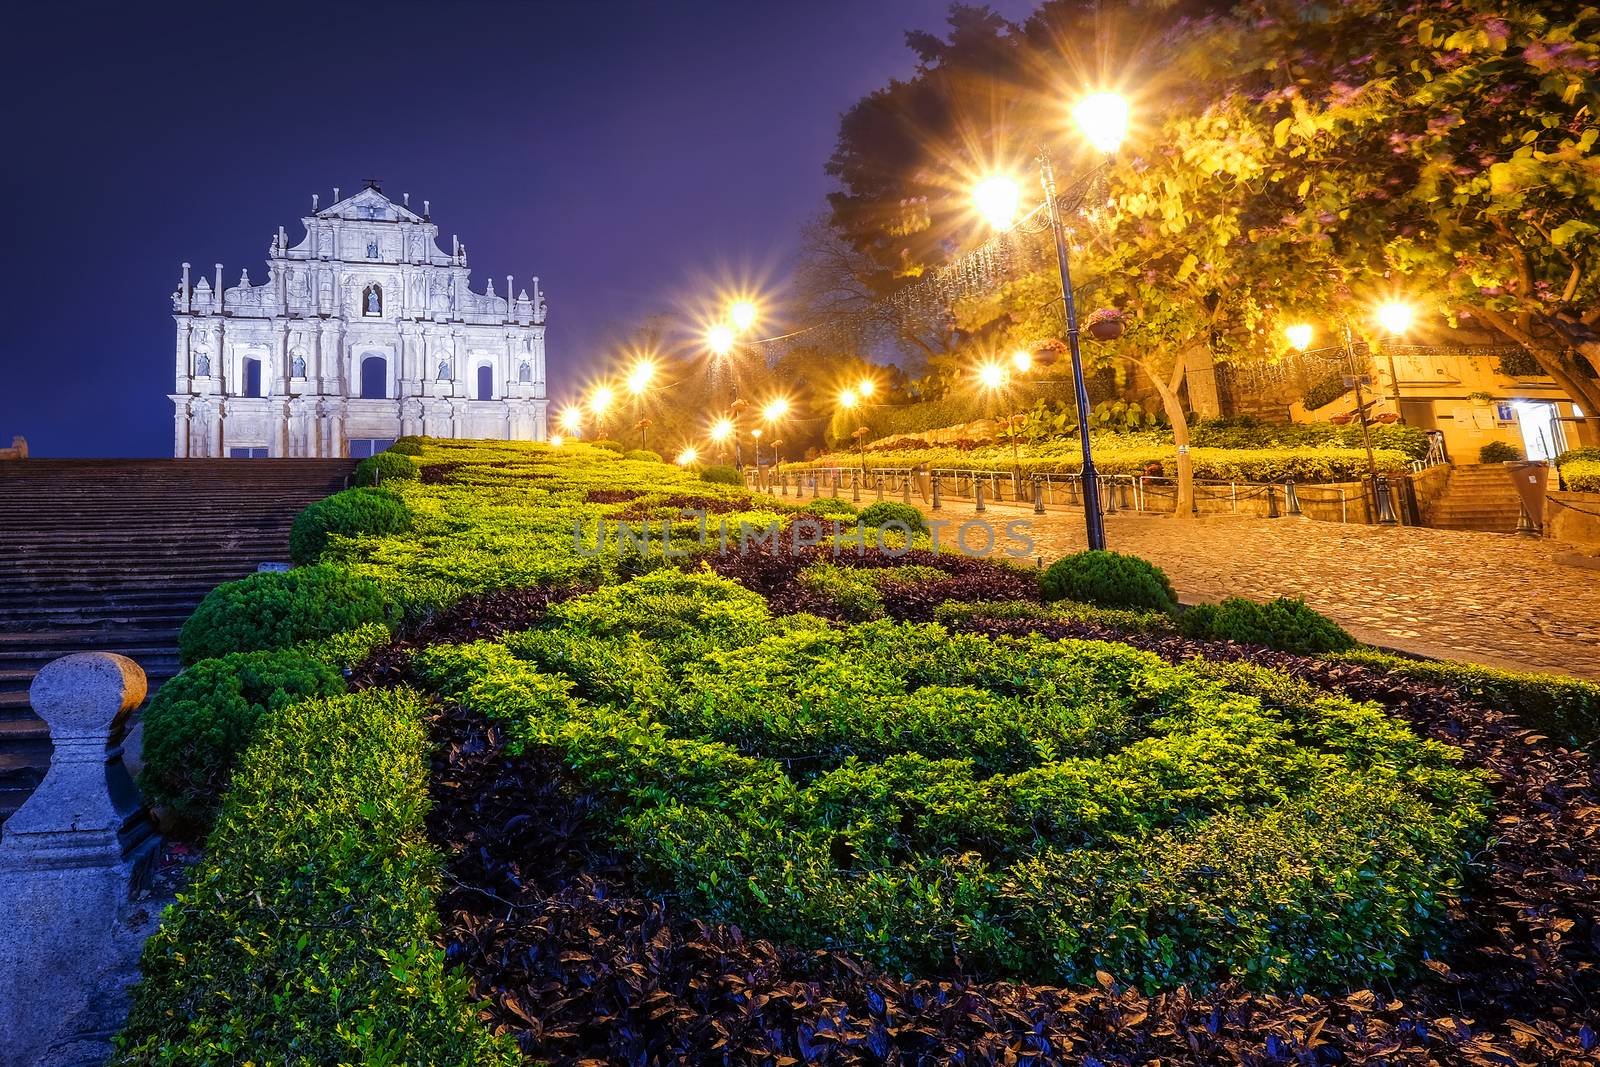 Ruins of St. Paul’s, one of Macau’s most famouse landmark and fabulous UNESCO World Heritage Site.